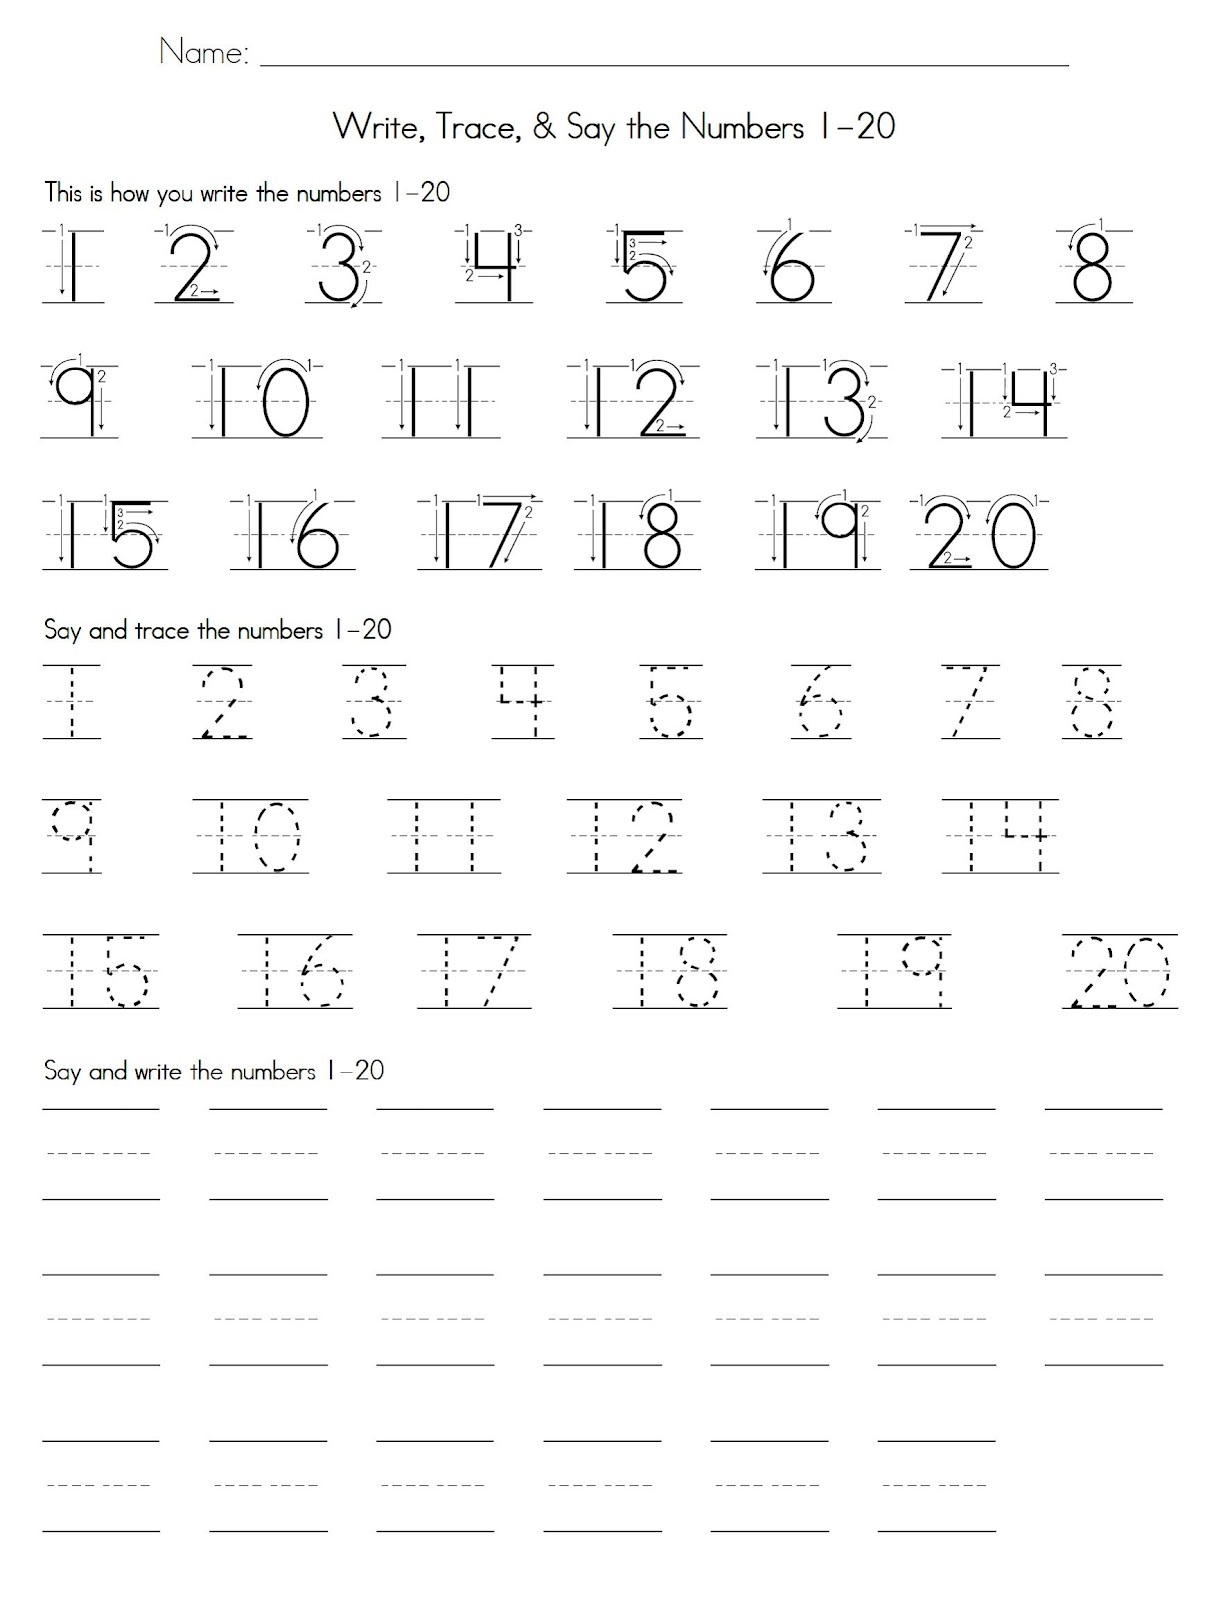 tracing-numbers-1-20-free-printables-printable-word-searches